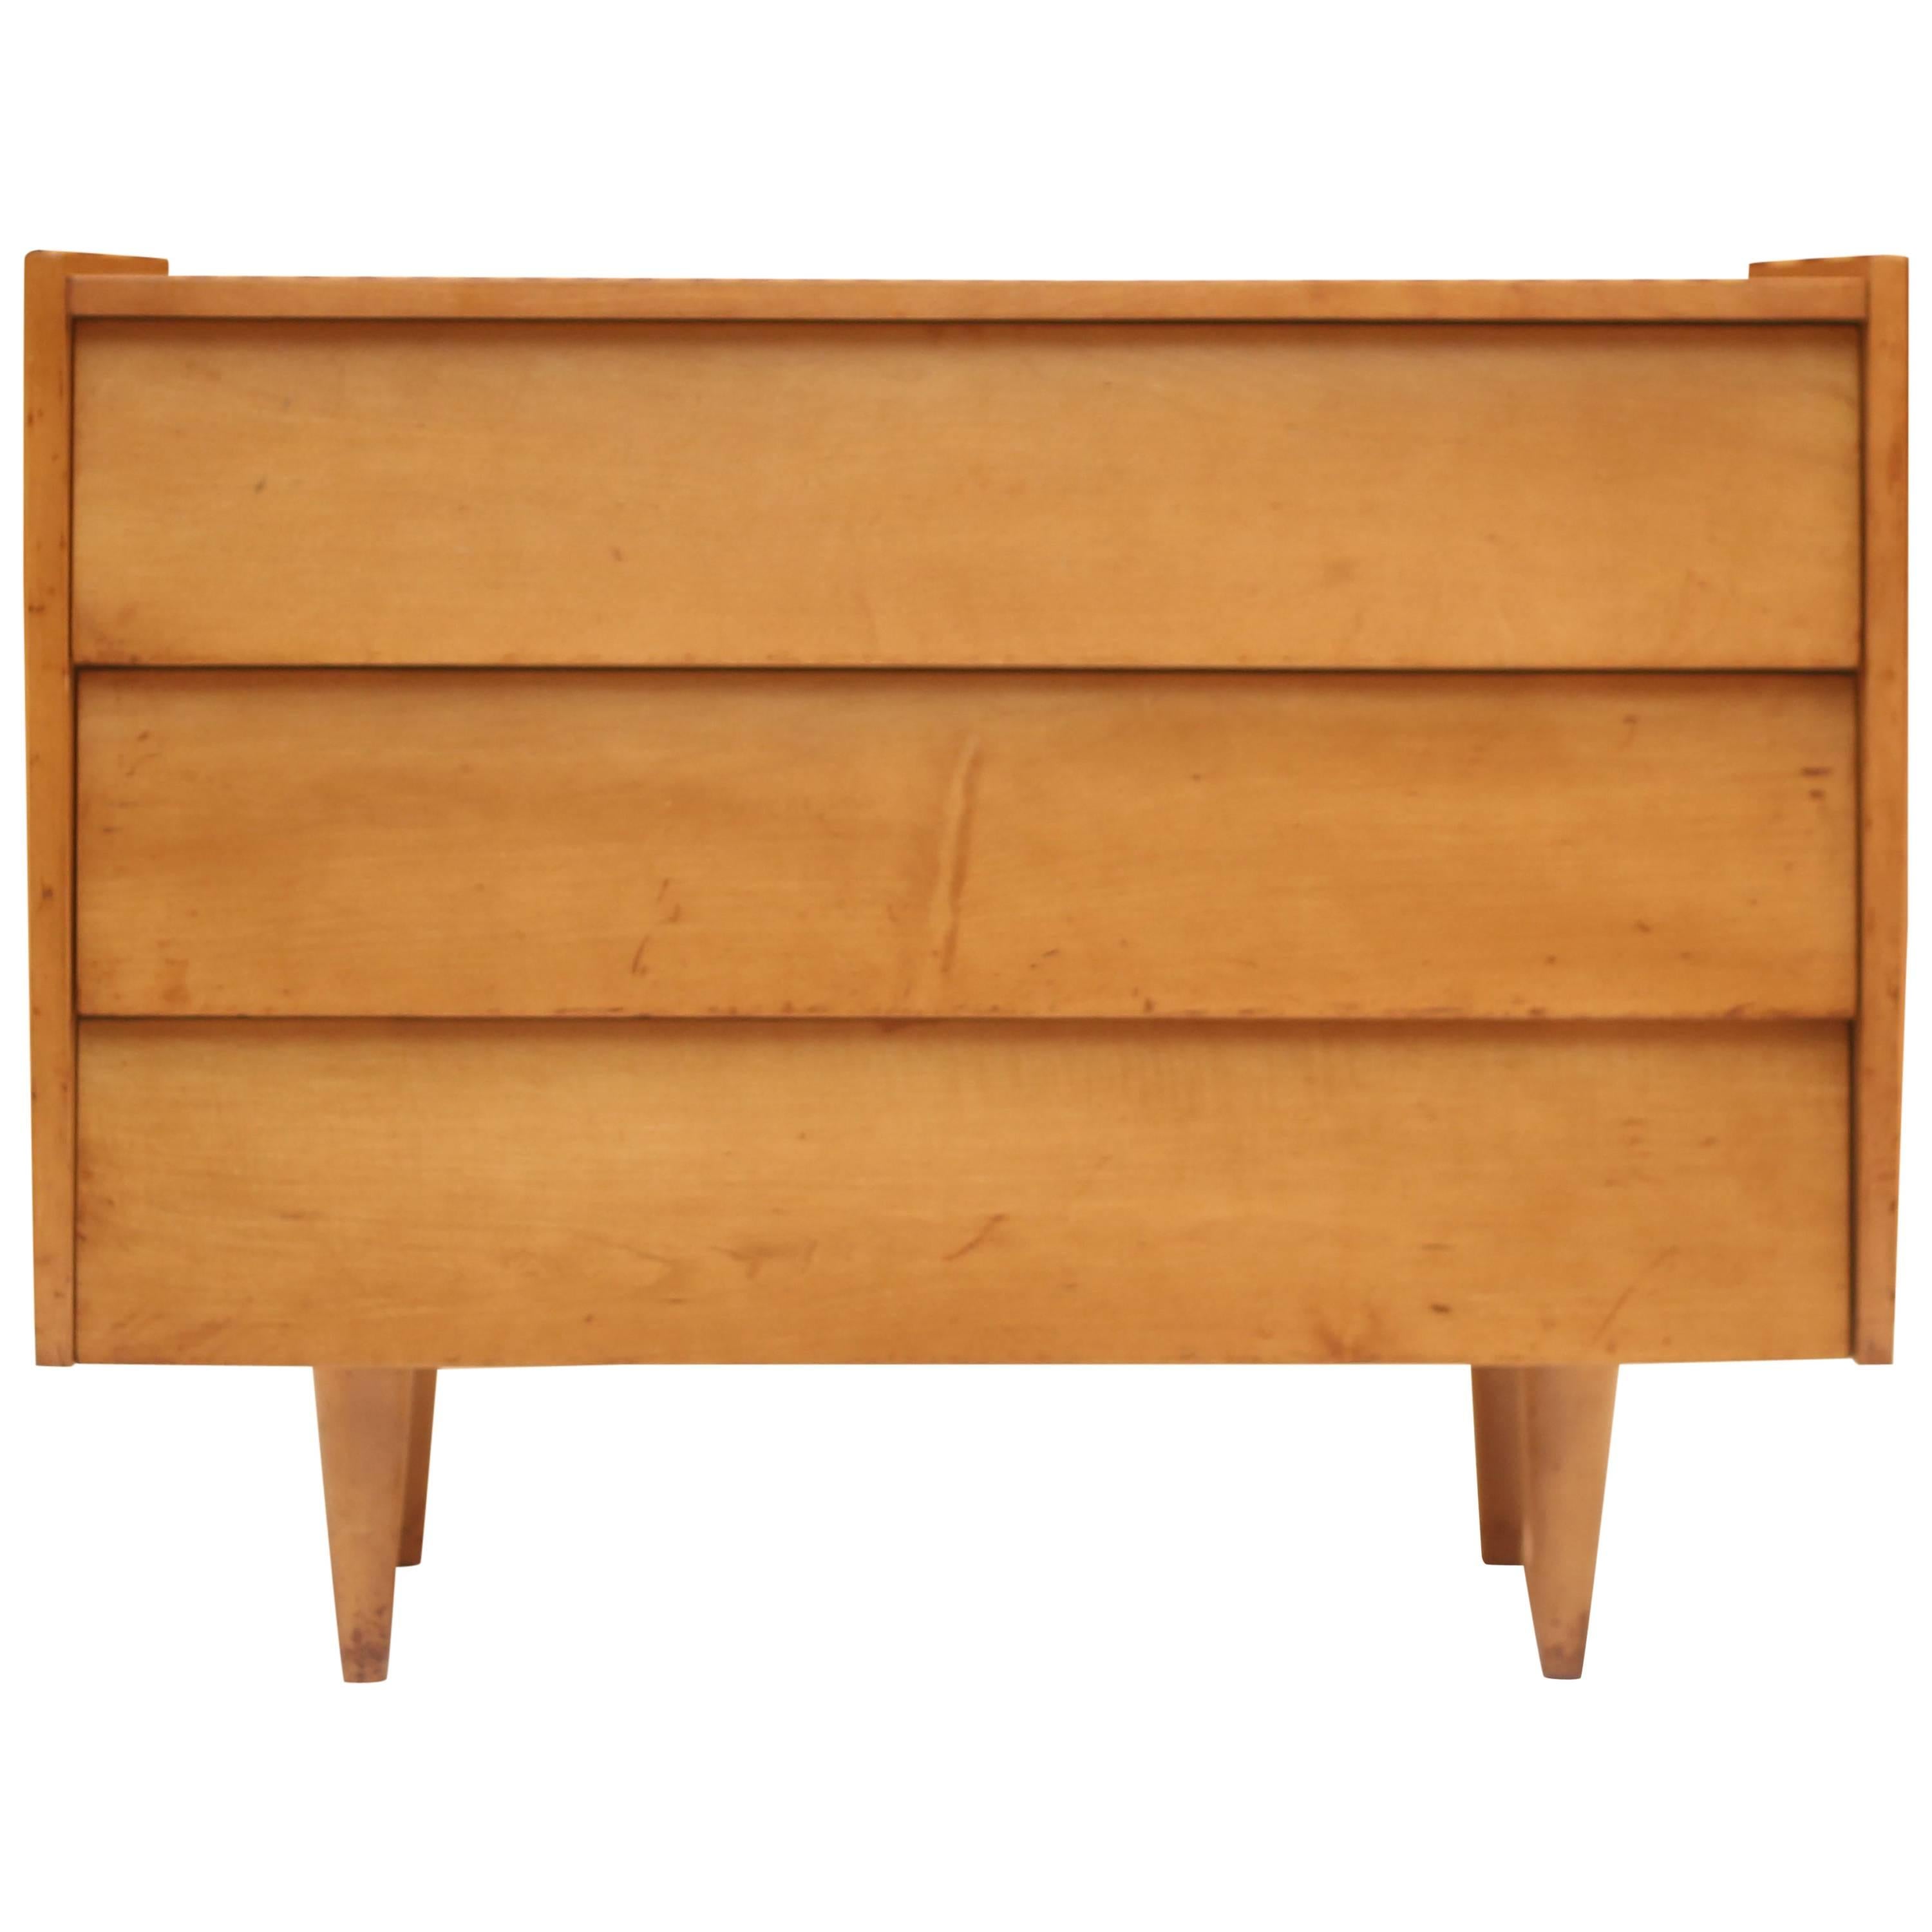 Early Florence Knoll Commode with Louvered Drawer Fronts